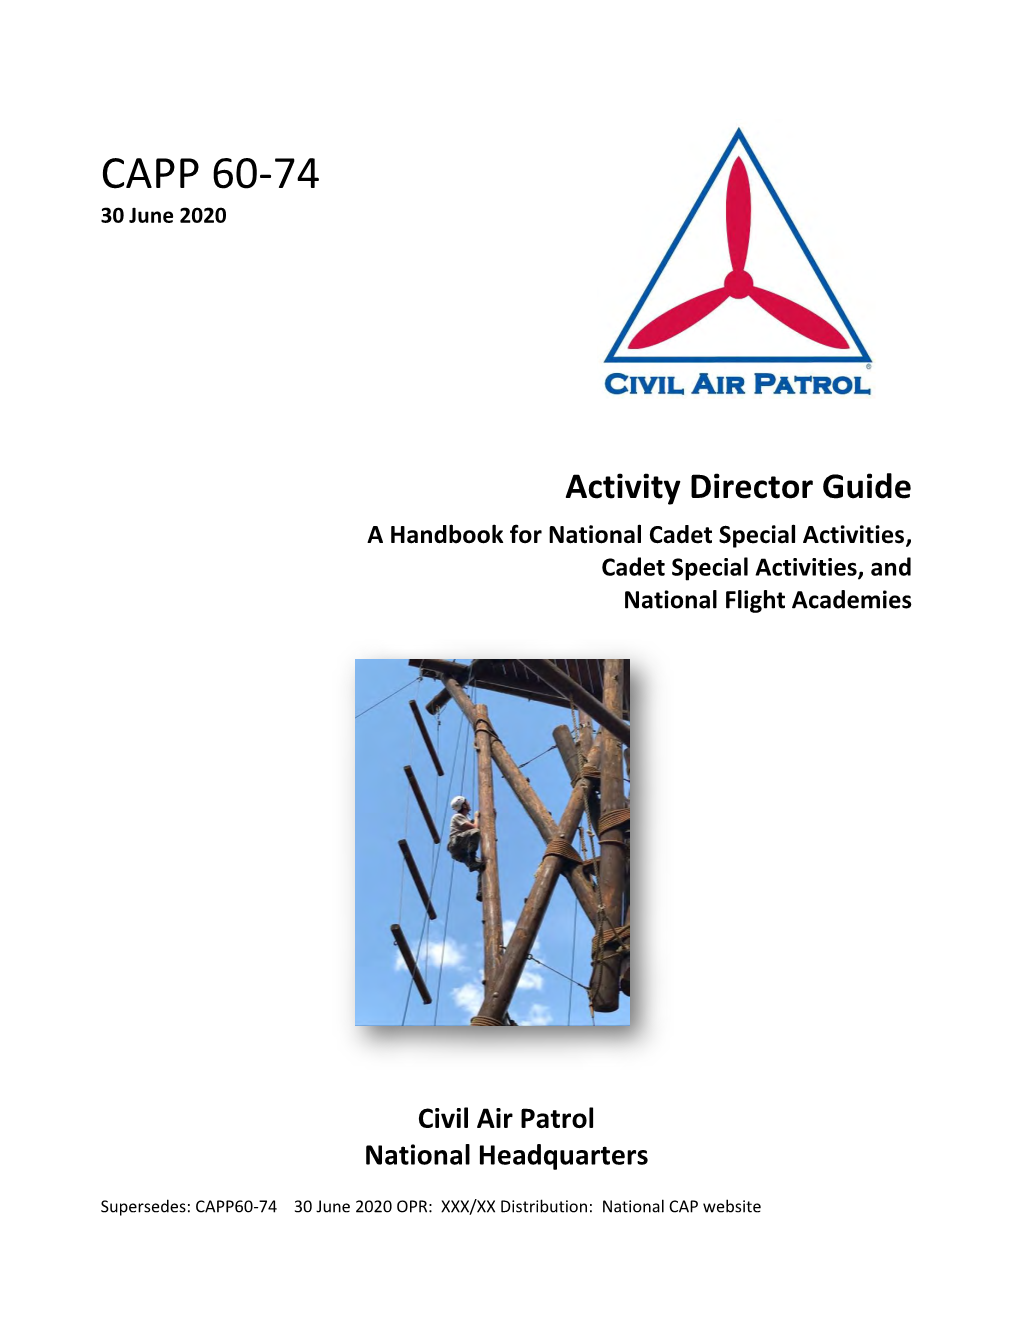 Activity Director Guide a Handbook for National Cadet Special Activities, Cadet Special Activities, and National Flight Academies